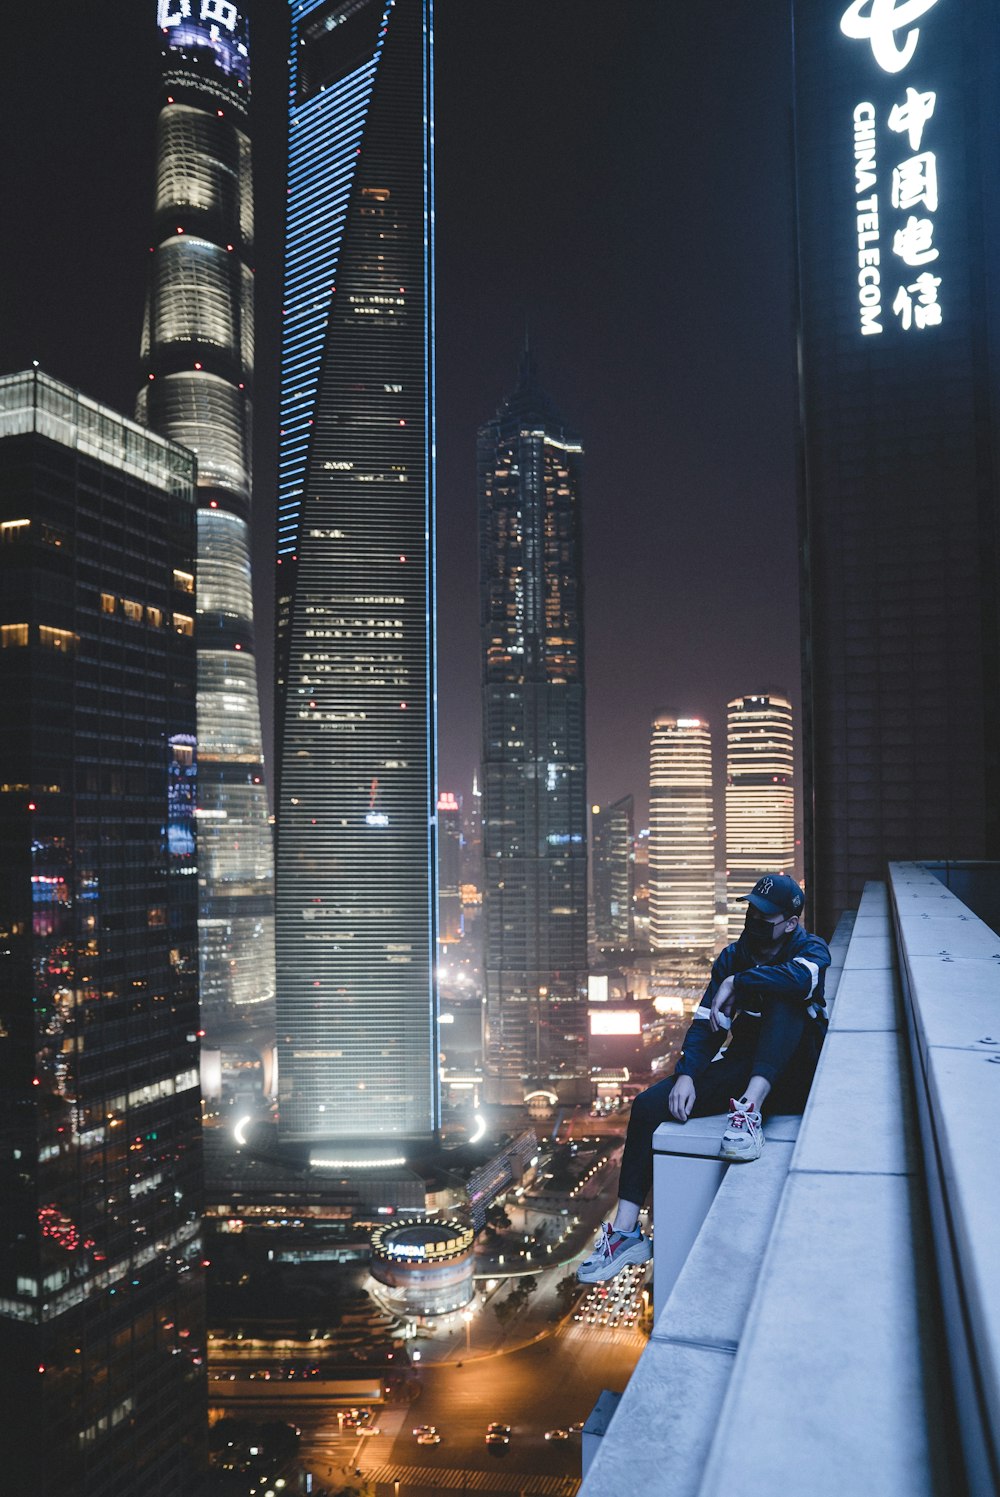 man sitting on building gutter during nighttime